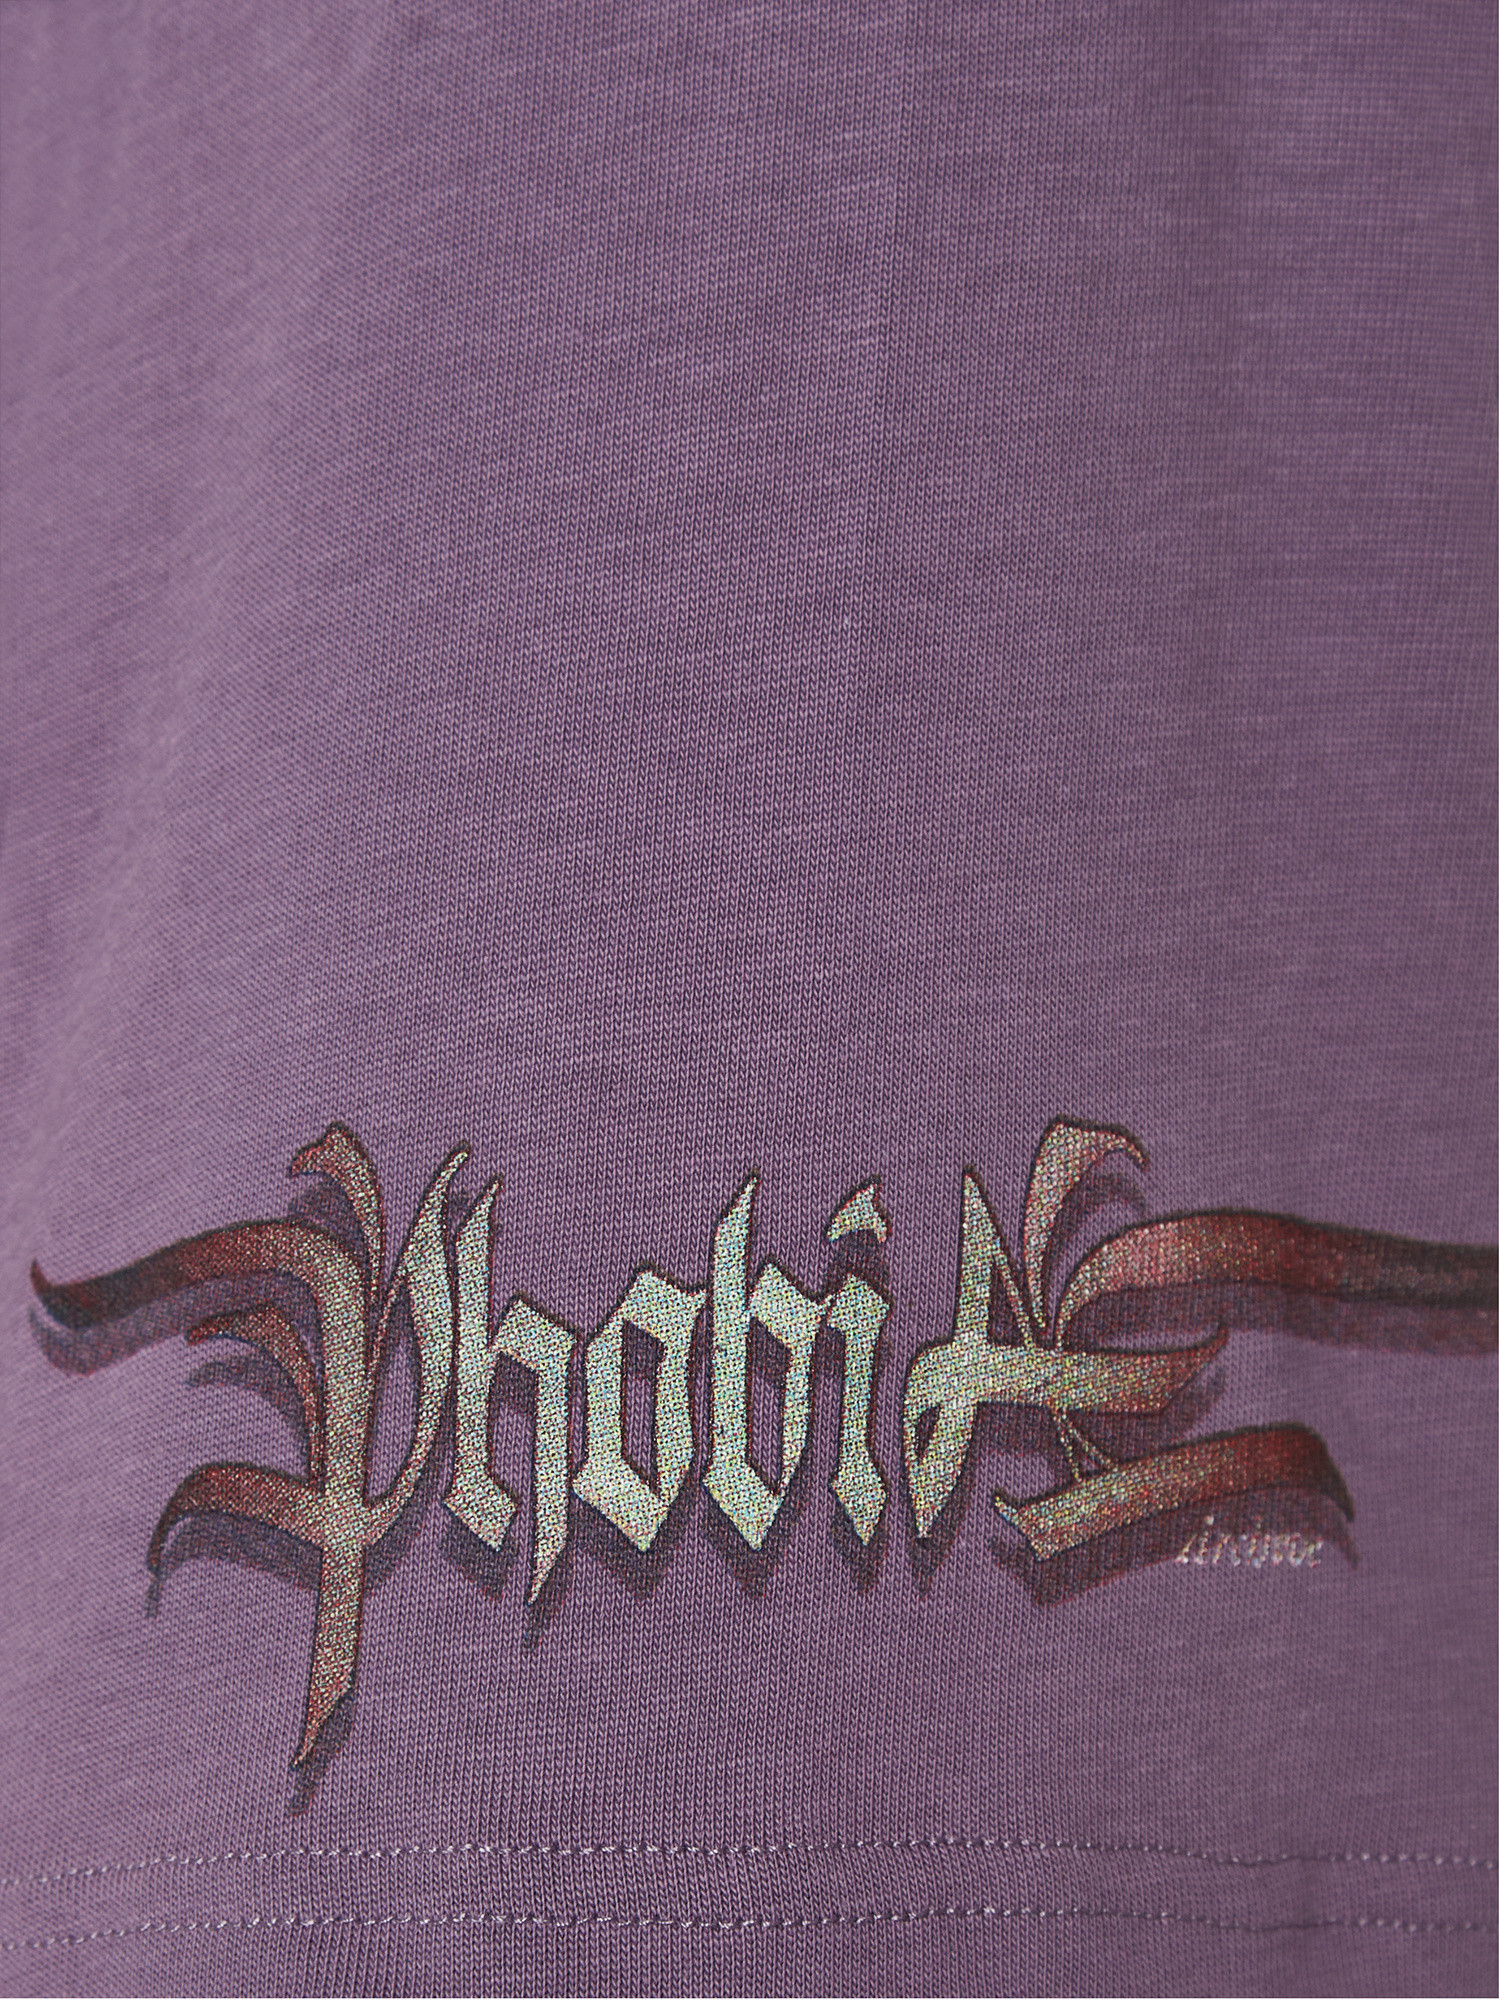 Phobia - Cotton T-shirt with shark print, Purple, large image number 2